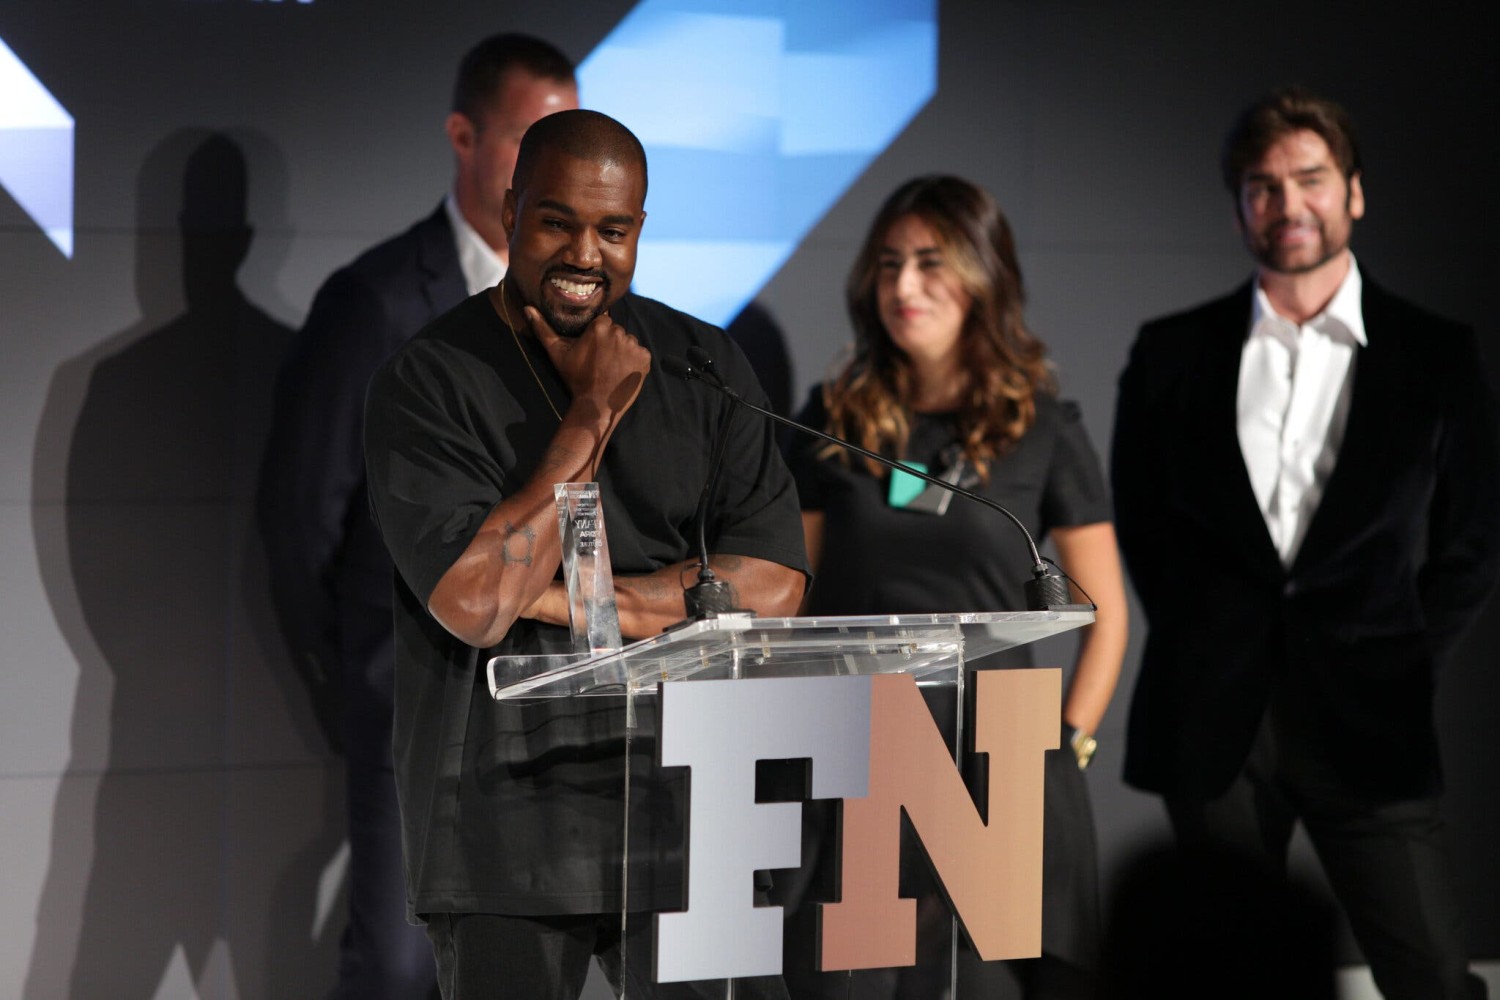 Mr. West accepting the Shoe of the Year prize for the Yeezy Boost 350 at the 2015 Footwear News Achievement Awards.Credit...Patrick MacLeod/WWD/Penske Media, via Getty Images